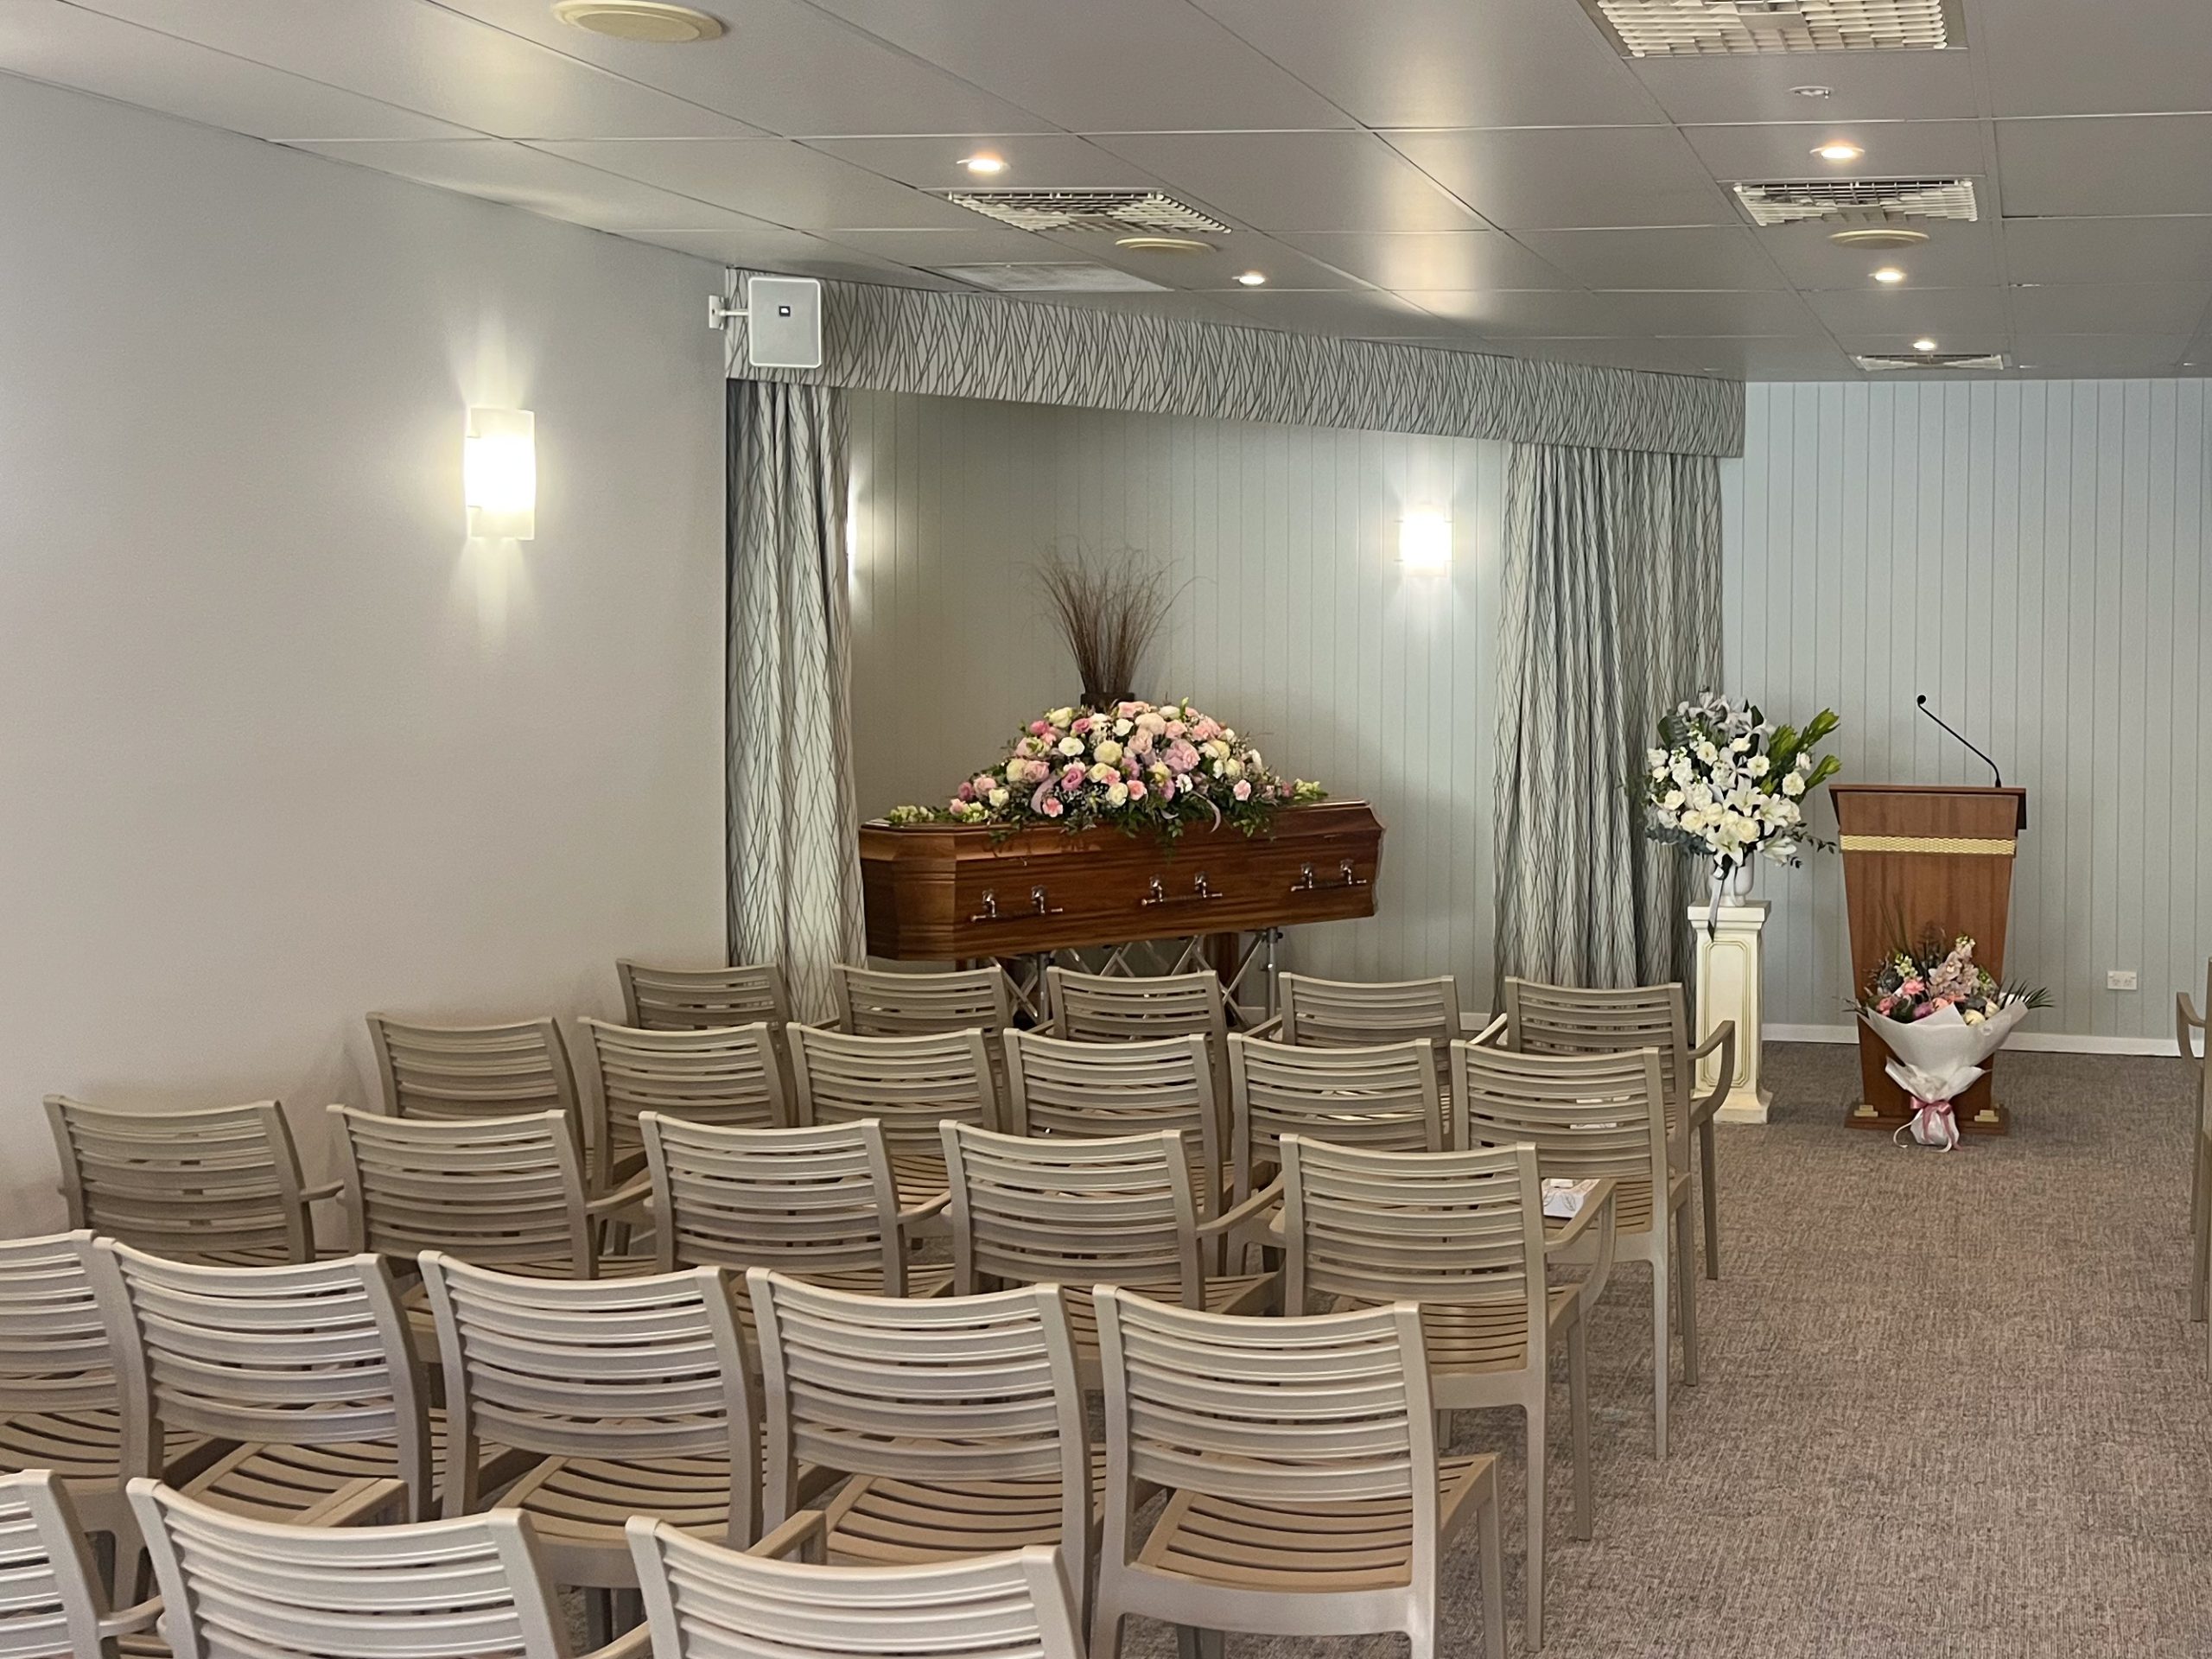 Refurbished Burleigh Heads Chapel with Coffin, floral display and beige chairs